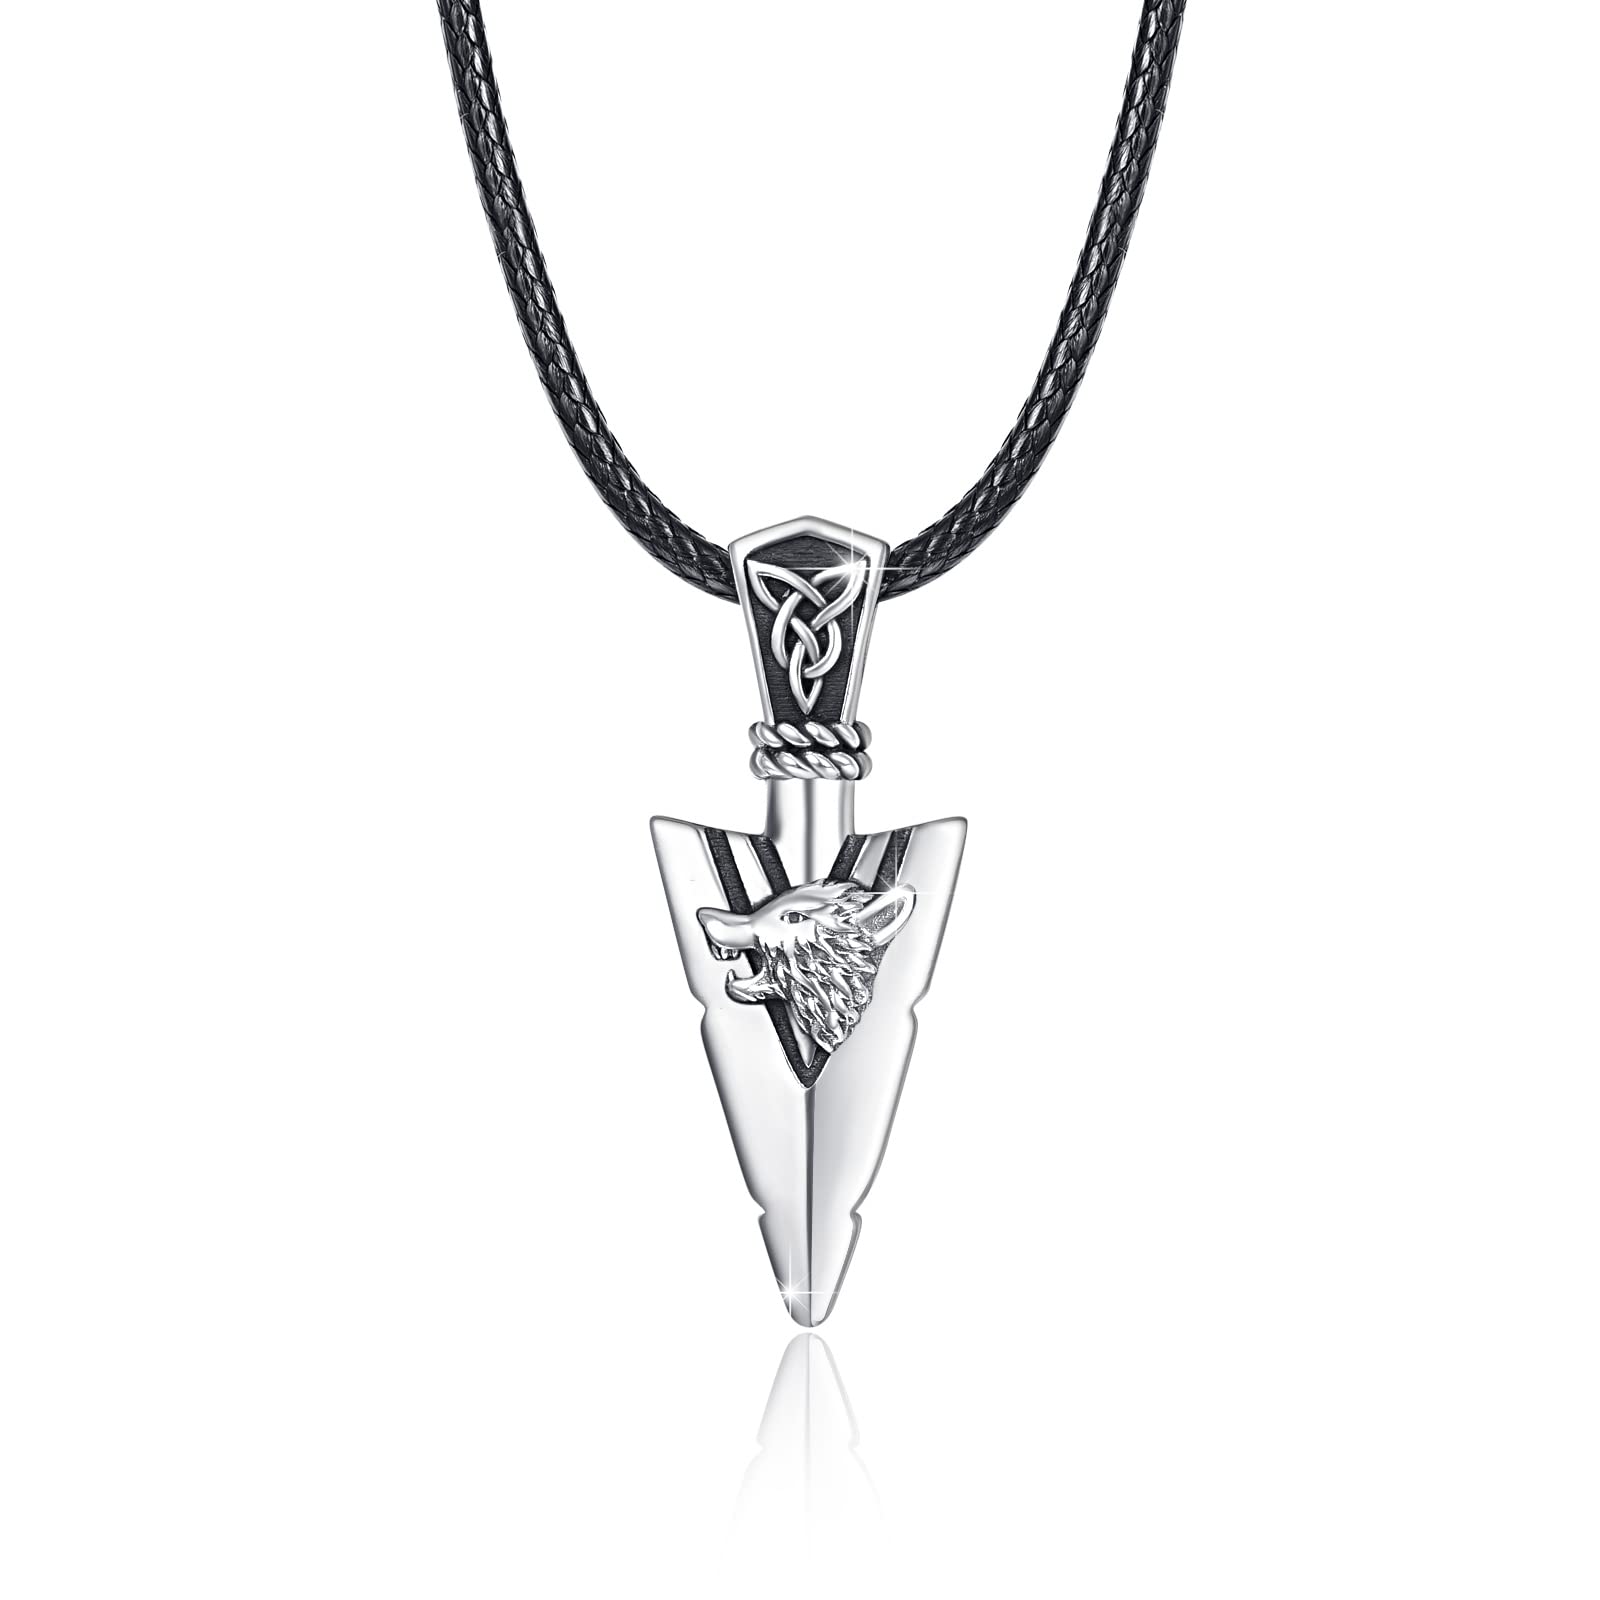 Gifts for Father's Day, Wolf Arrowhead Silver Necklace, Silver Wolf Sword Pendant Necklace, Viking Celtic Knot Rune Knight Pendant Protection Amulet,Nordic Myth Scandinavian Vintage Gothic Jewelry